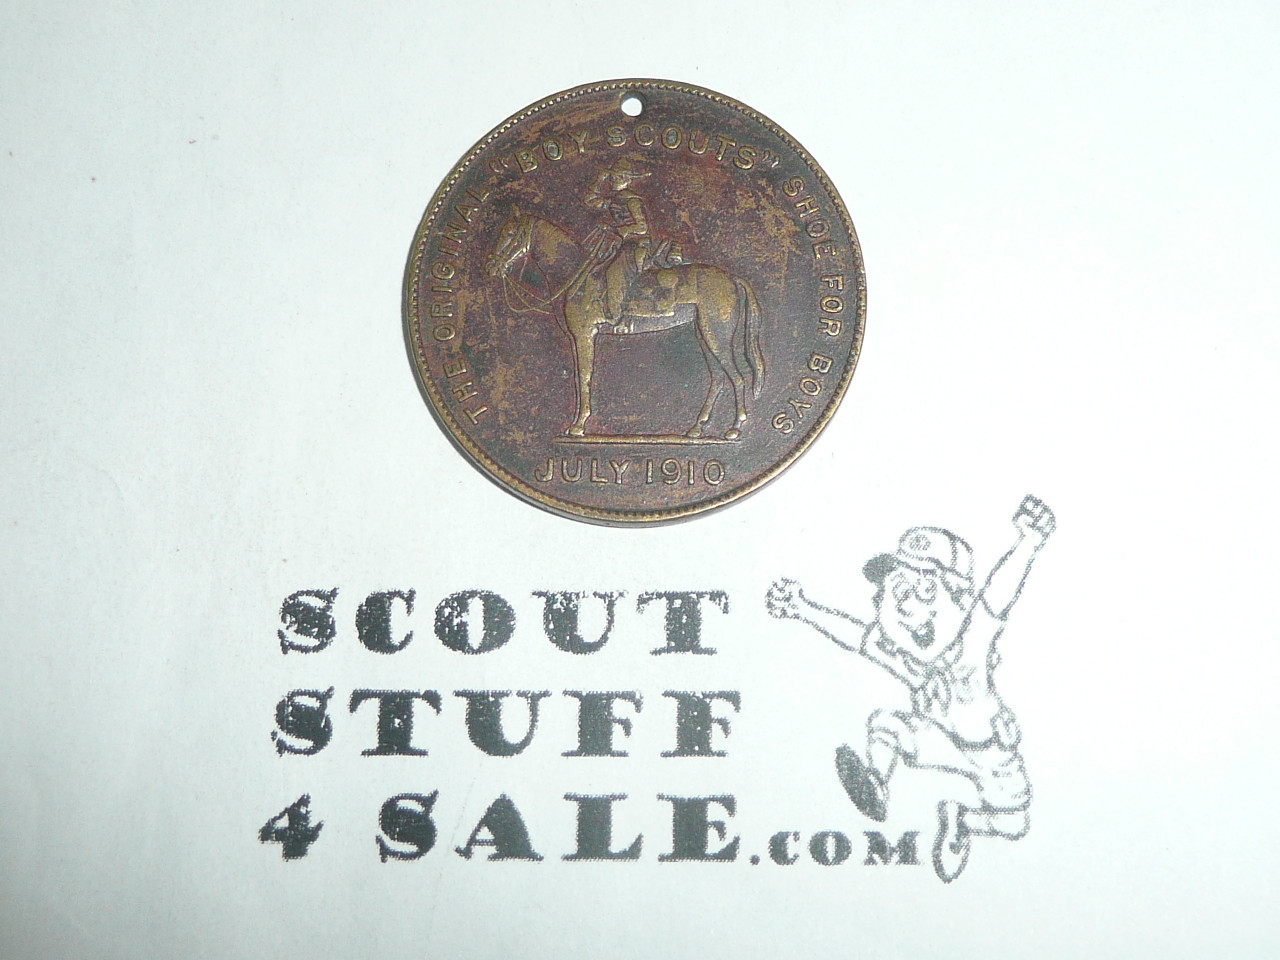 Excelsior Shoe Company Teens Boy Scout Coin / Token , Version 2